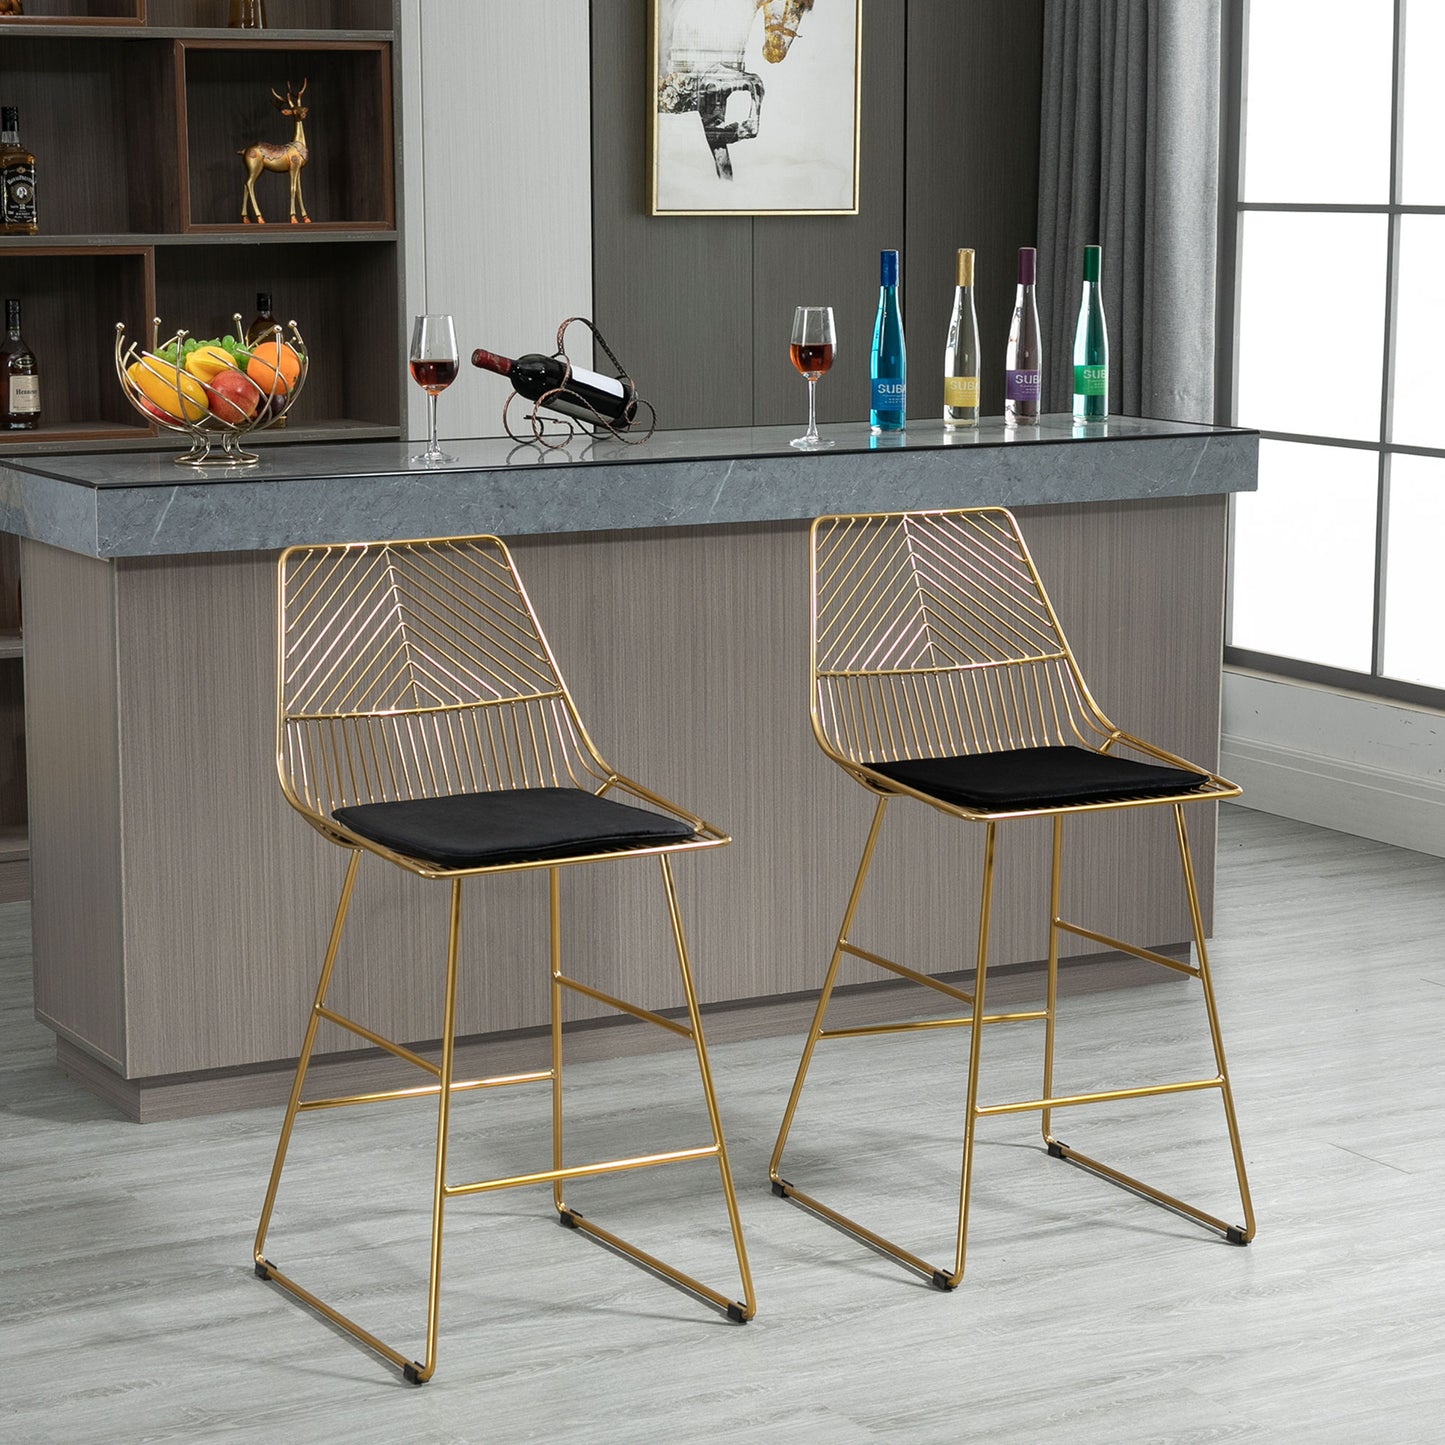 HOMCOM Modern Counter Height Bar Stools Set of 2 pcs Wire Metal Barstools for Kitchen